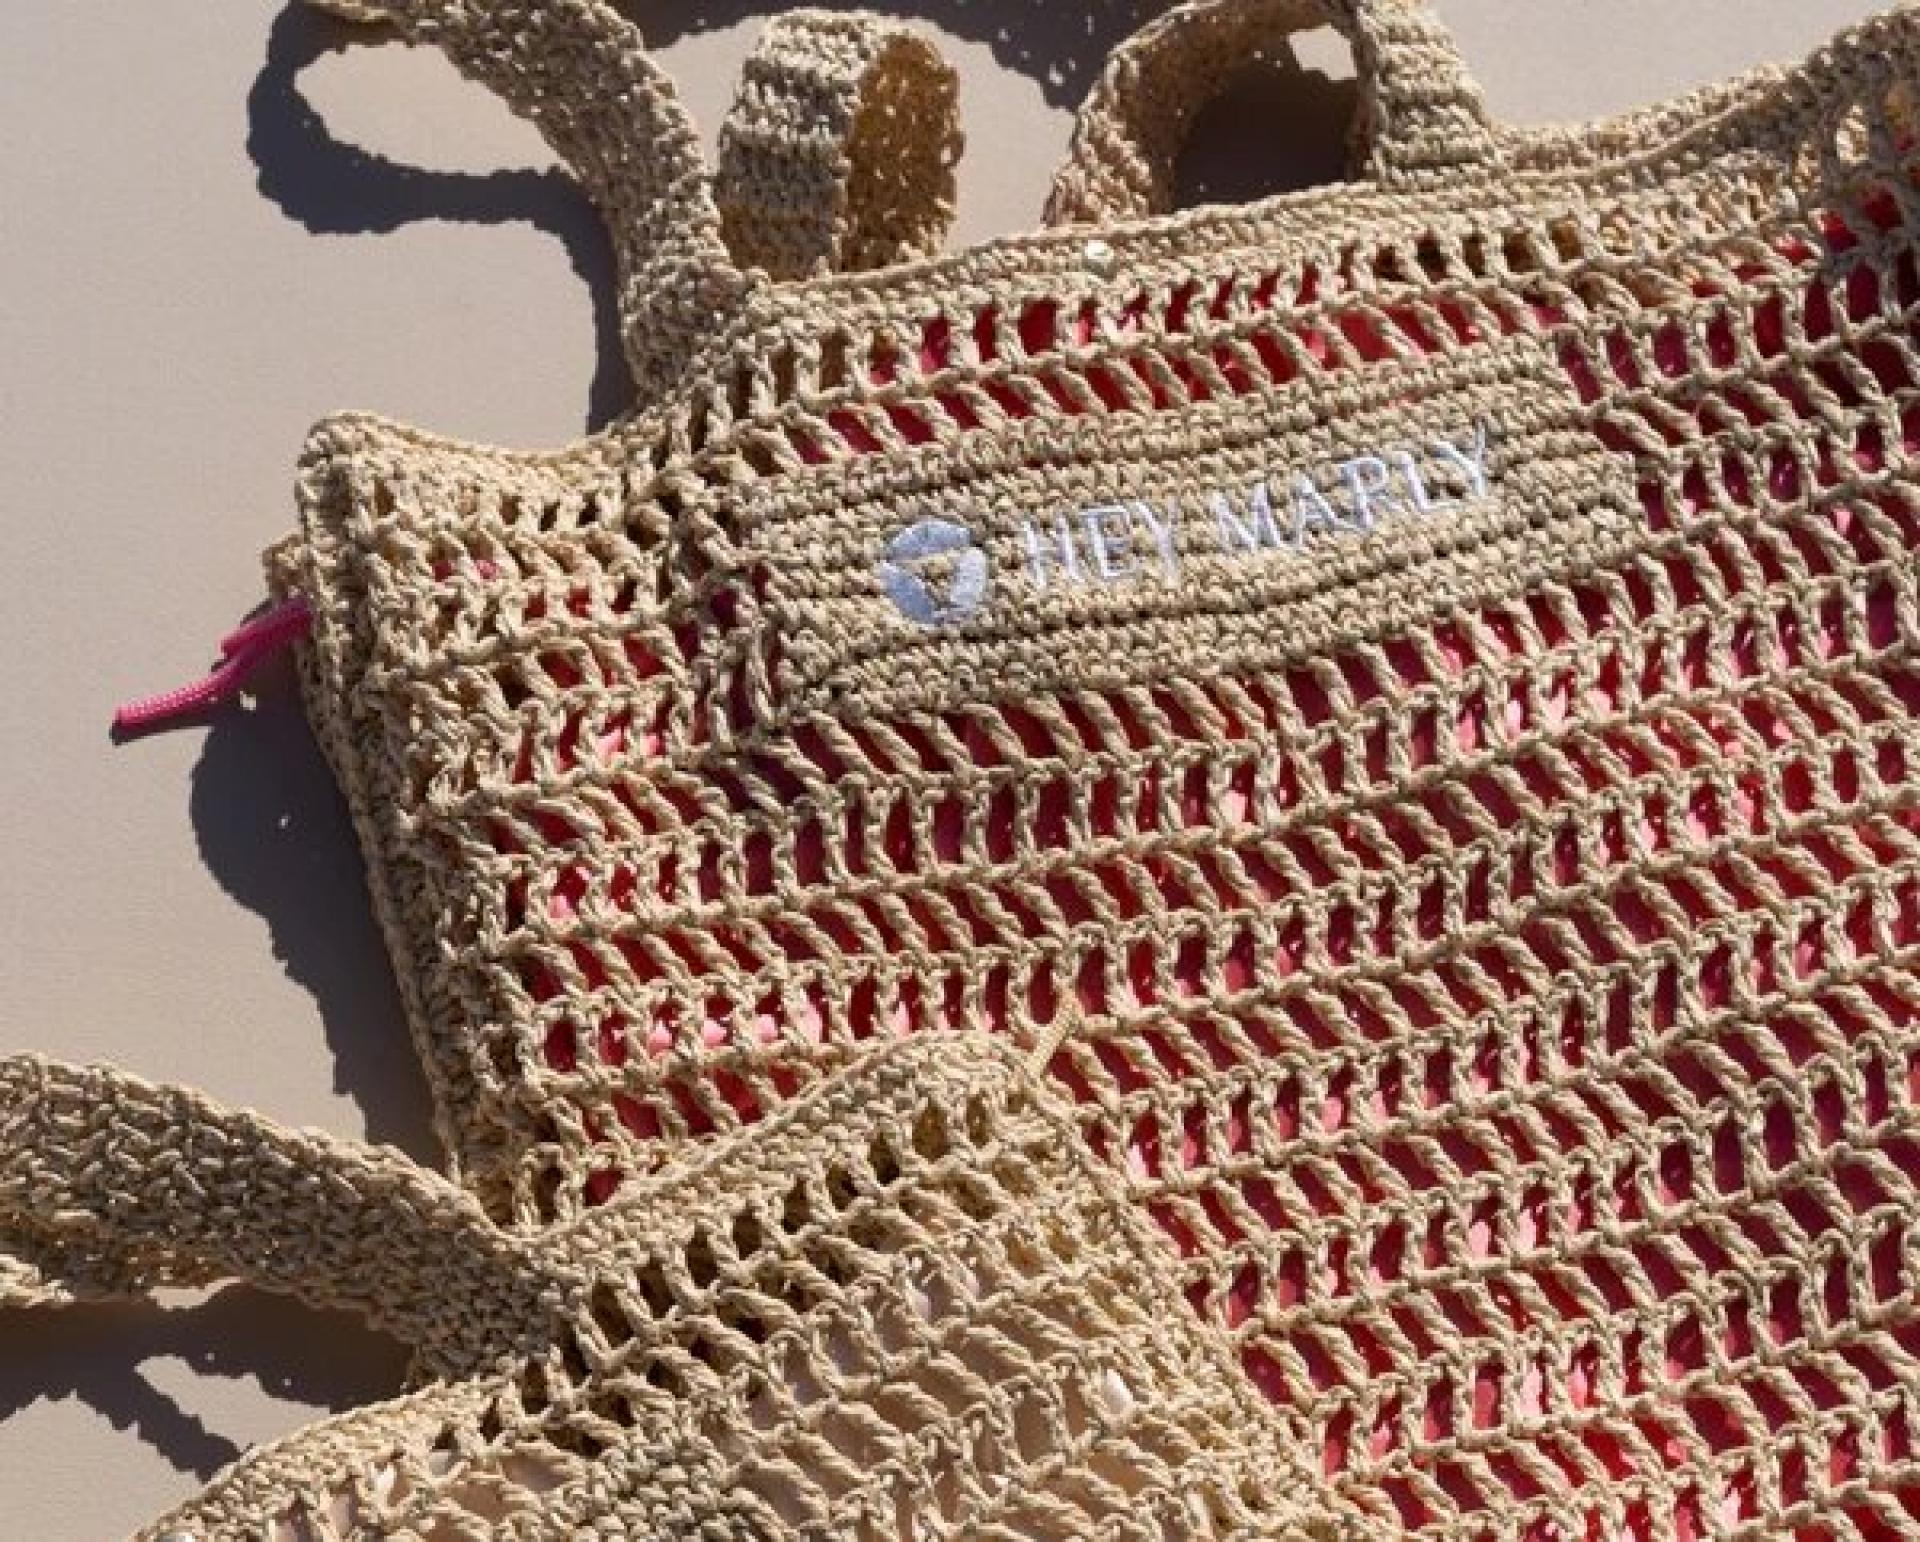 Hey Marly Crochet Bag  Coral